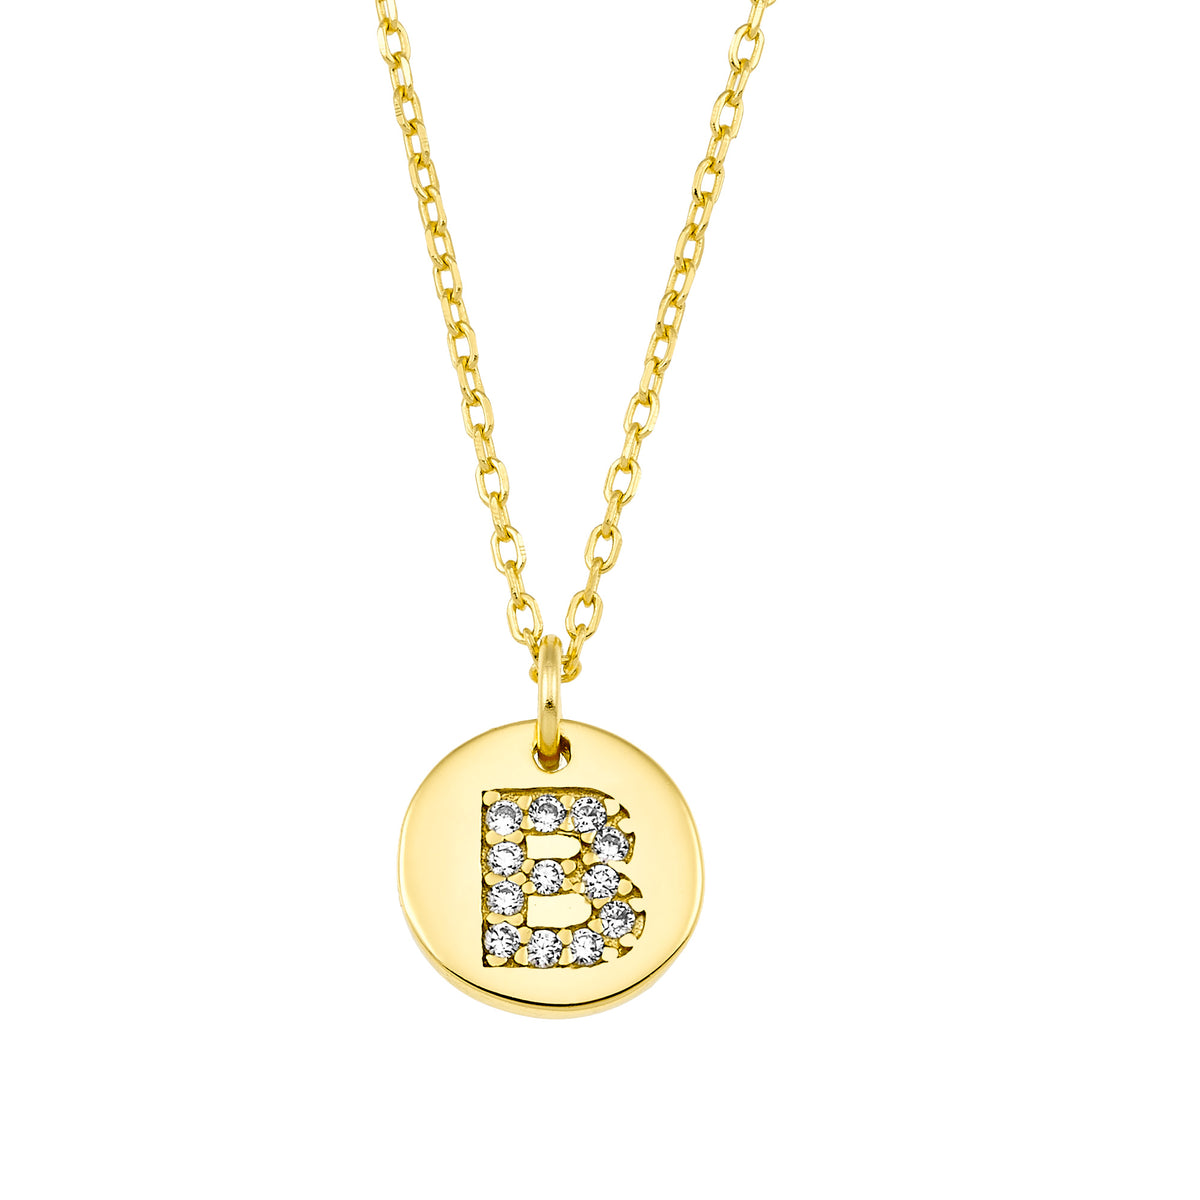 Magna | B Letter Necklace | White CZ | 18K Gold Plated 925 Silver